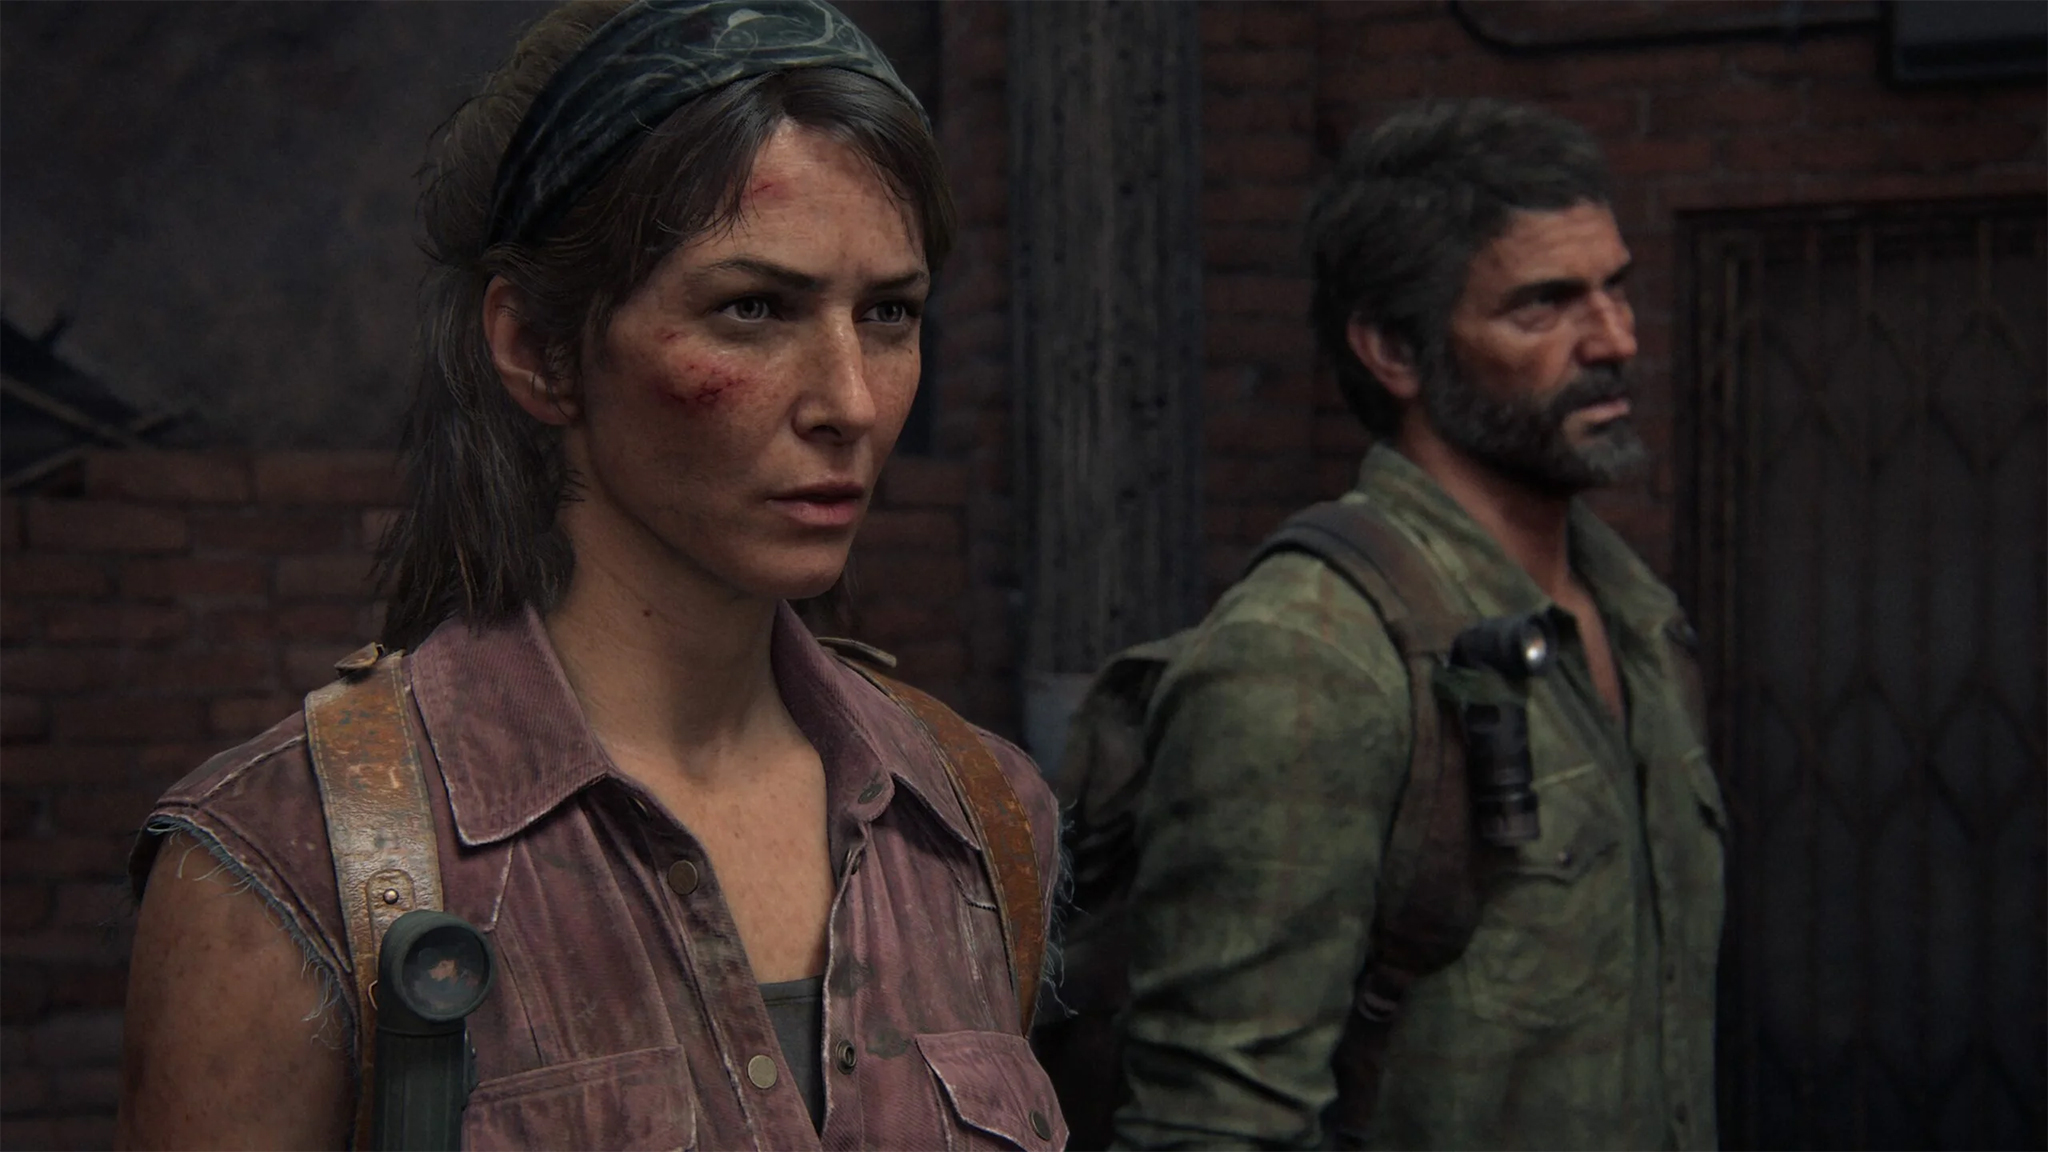 The Last of Us: My thoughts on Joel [SPOILERS]